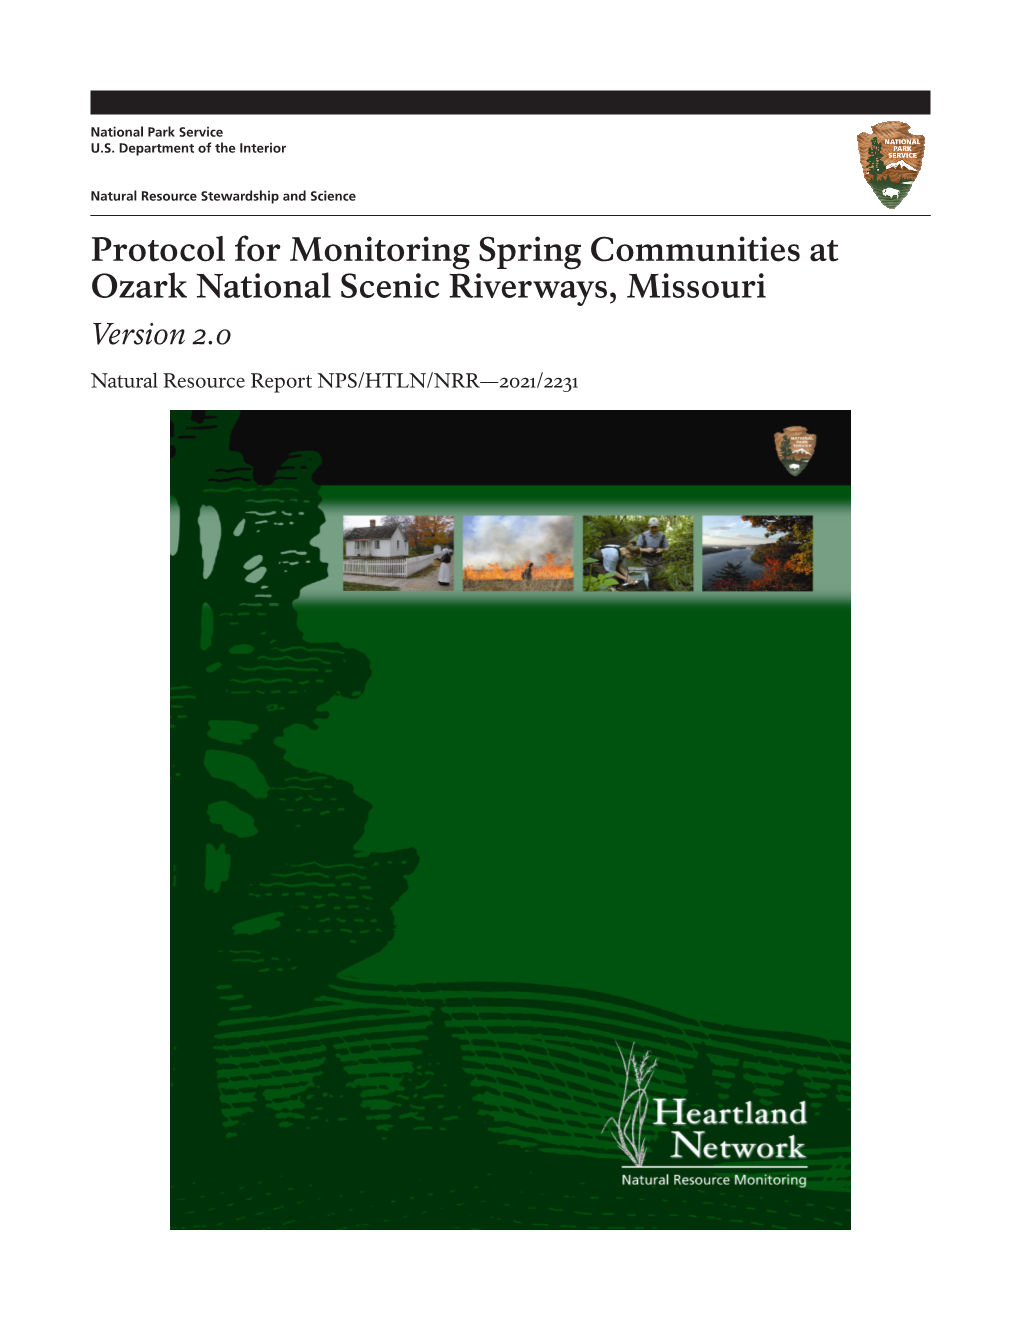 Protocol for Monitoring Spring Communities at Ozark National Scenic Riverways, Missouri Version 2.0